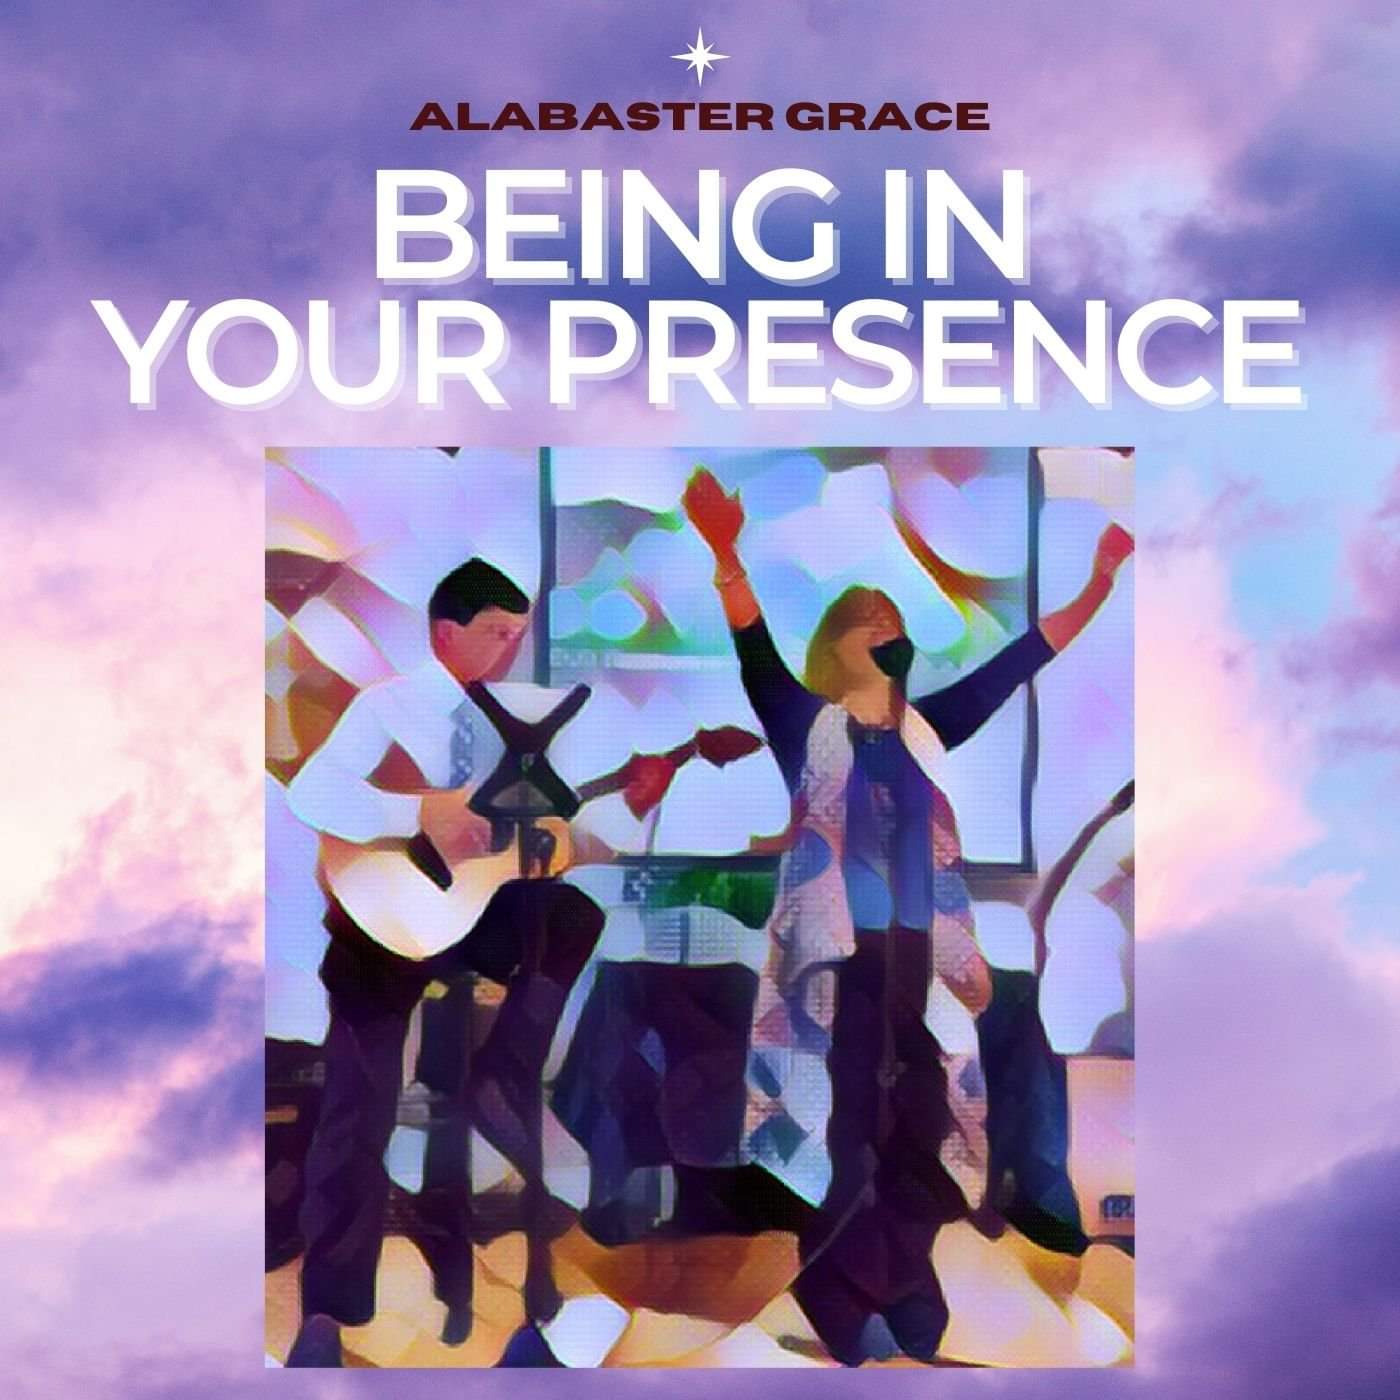 Alabaster Grace - Being in Your Presence